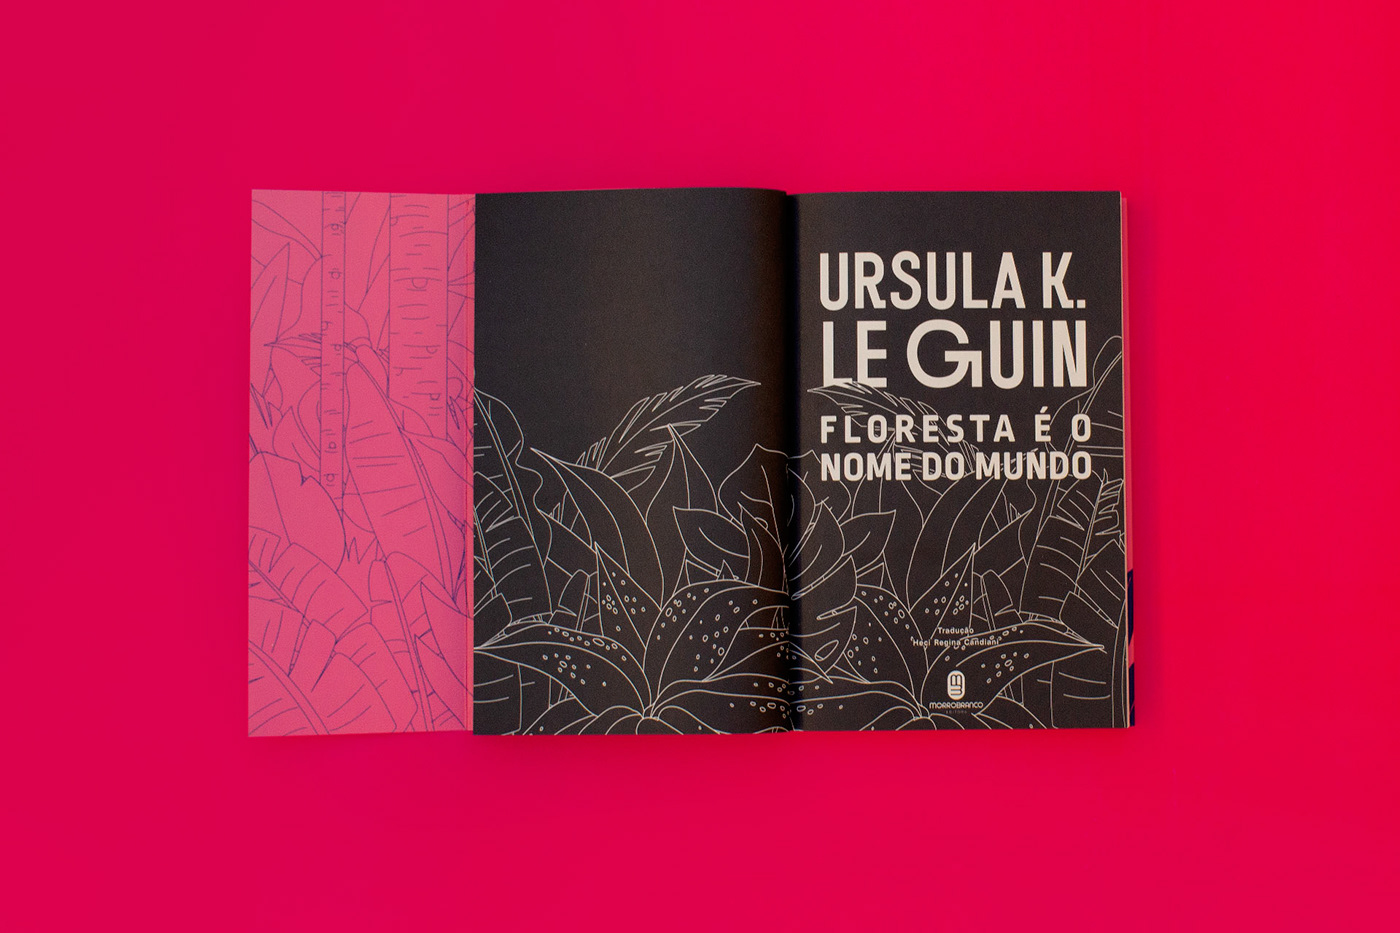 bookcover colonialism science fiction Scifi ursula k. le guin anti colonial anti war environment feminism forest